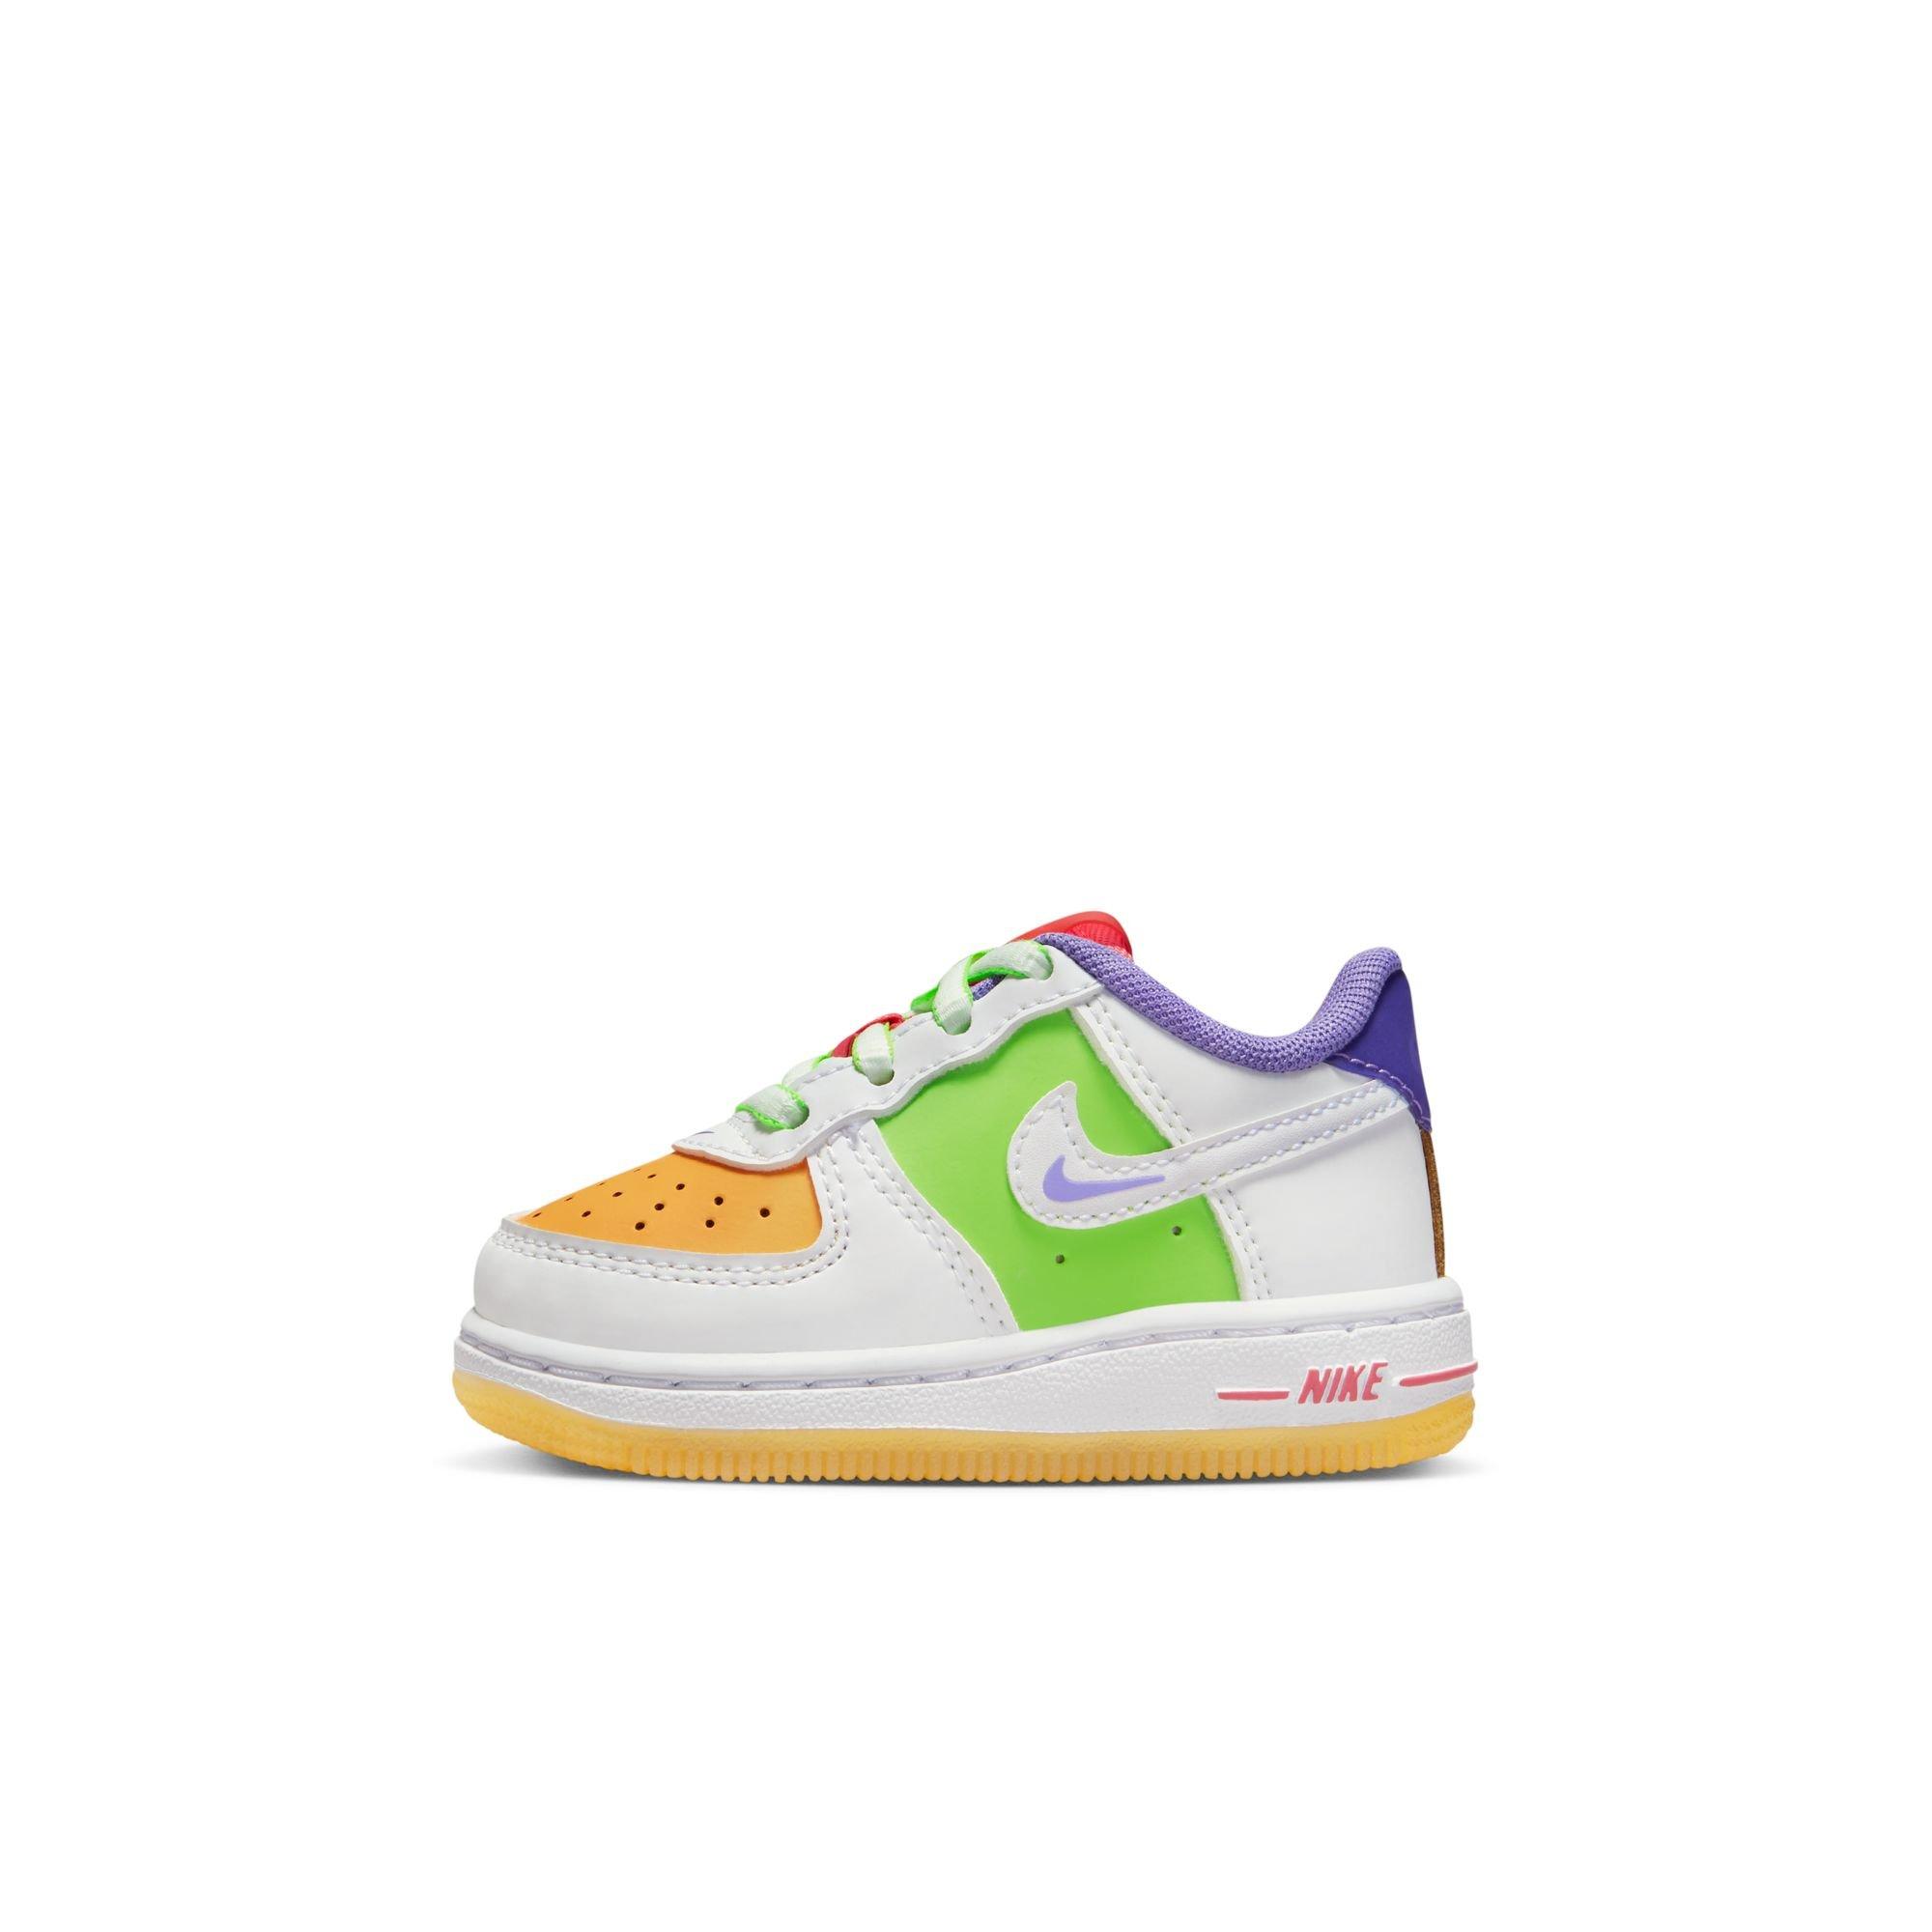 Lavender Smiley Face Air Force 1 Air Force 1 Air Force 1s 